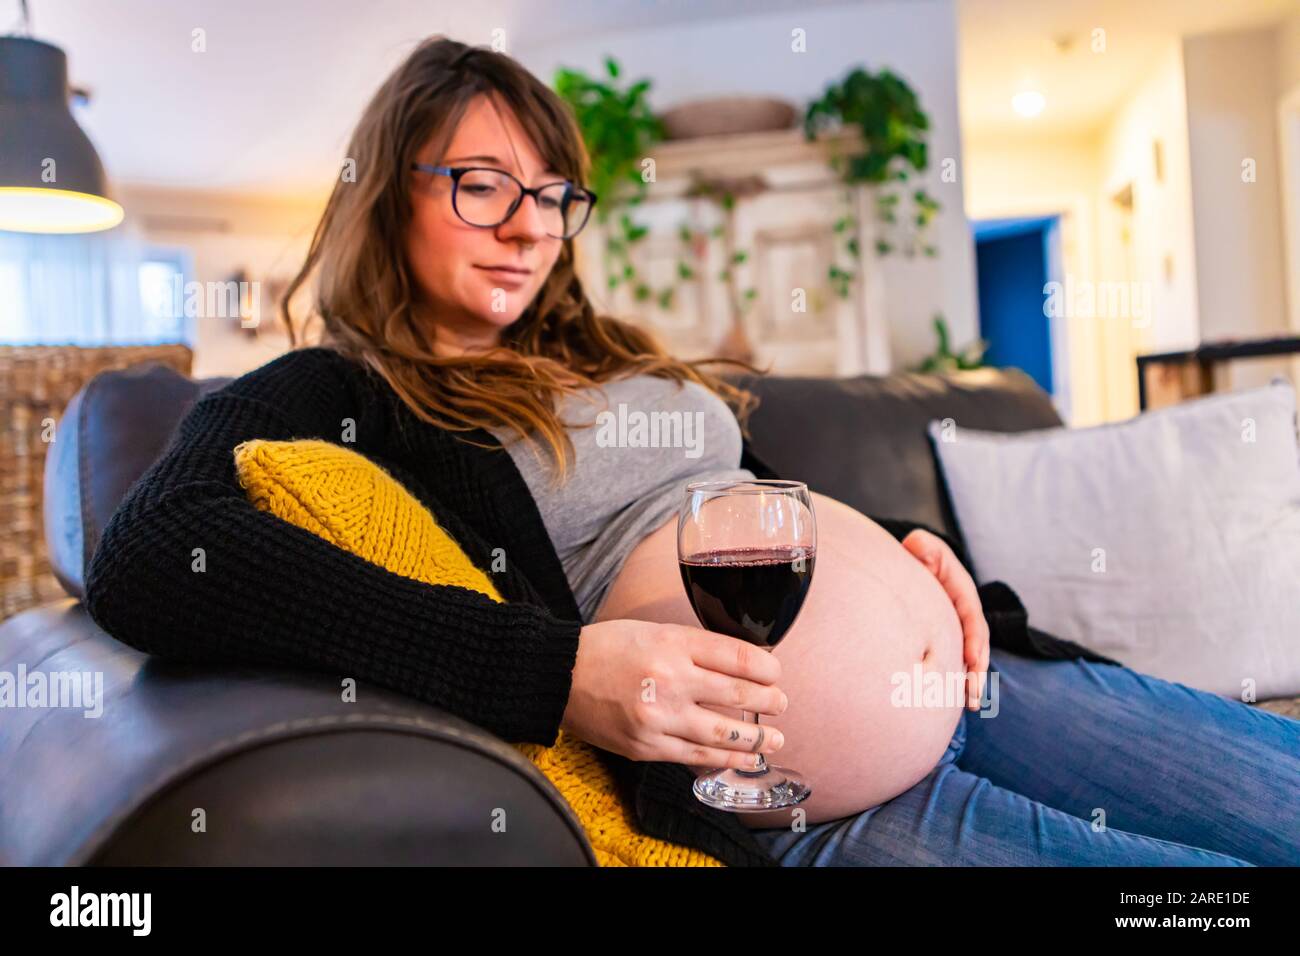 A portrait of a heavily pregnant woman sitting on a sofa in the home with a glass of red wine, unaware of the risks of fetal alcohol syndrome. Copy space to right Stock Photo